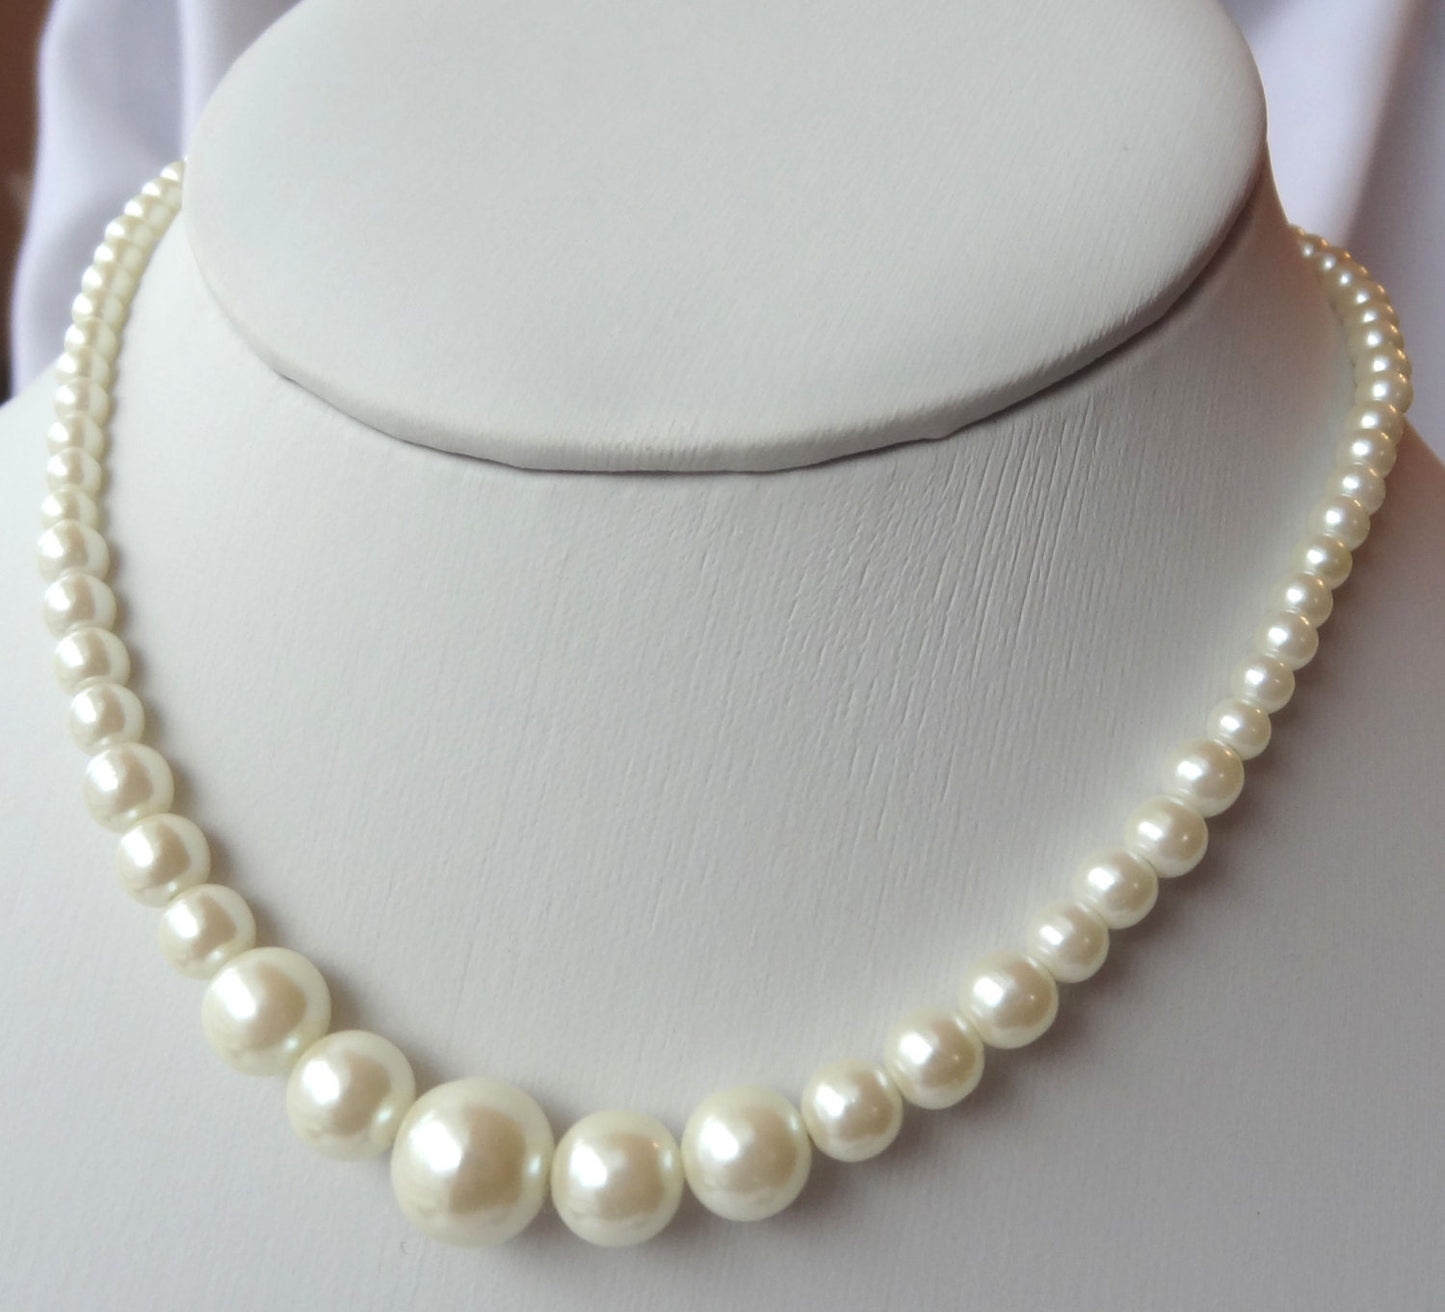 Graduated Pearl Necklace,Round Pearl Necklace,Flower Girl Pearl Necklace,Jr Bridesmaid Bridesmaid Pearl Gift Necklace,Simple Pearl Necklace